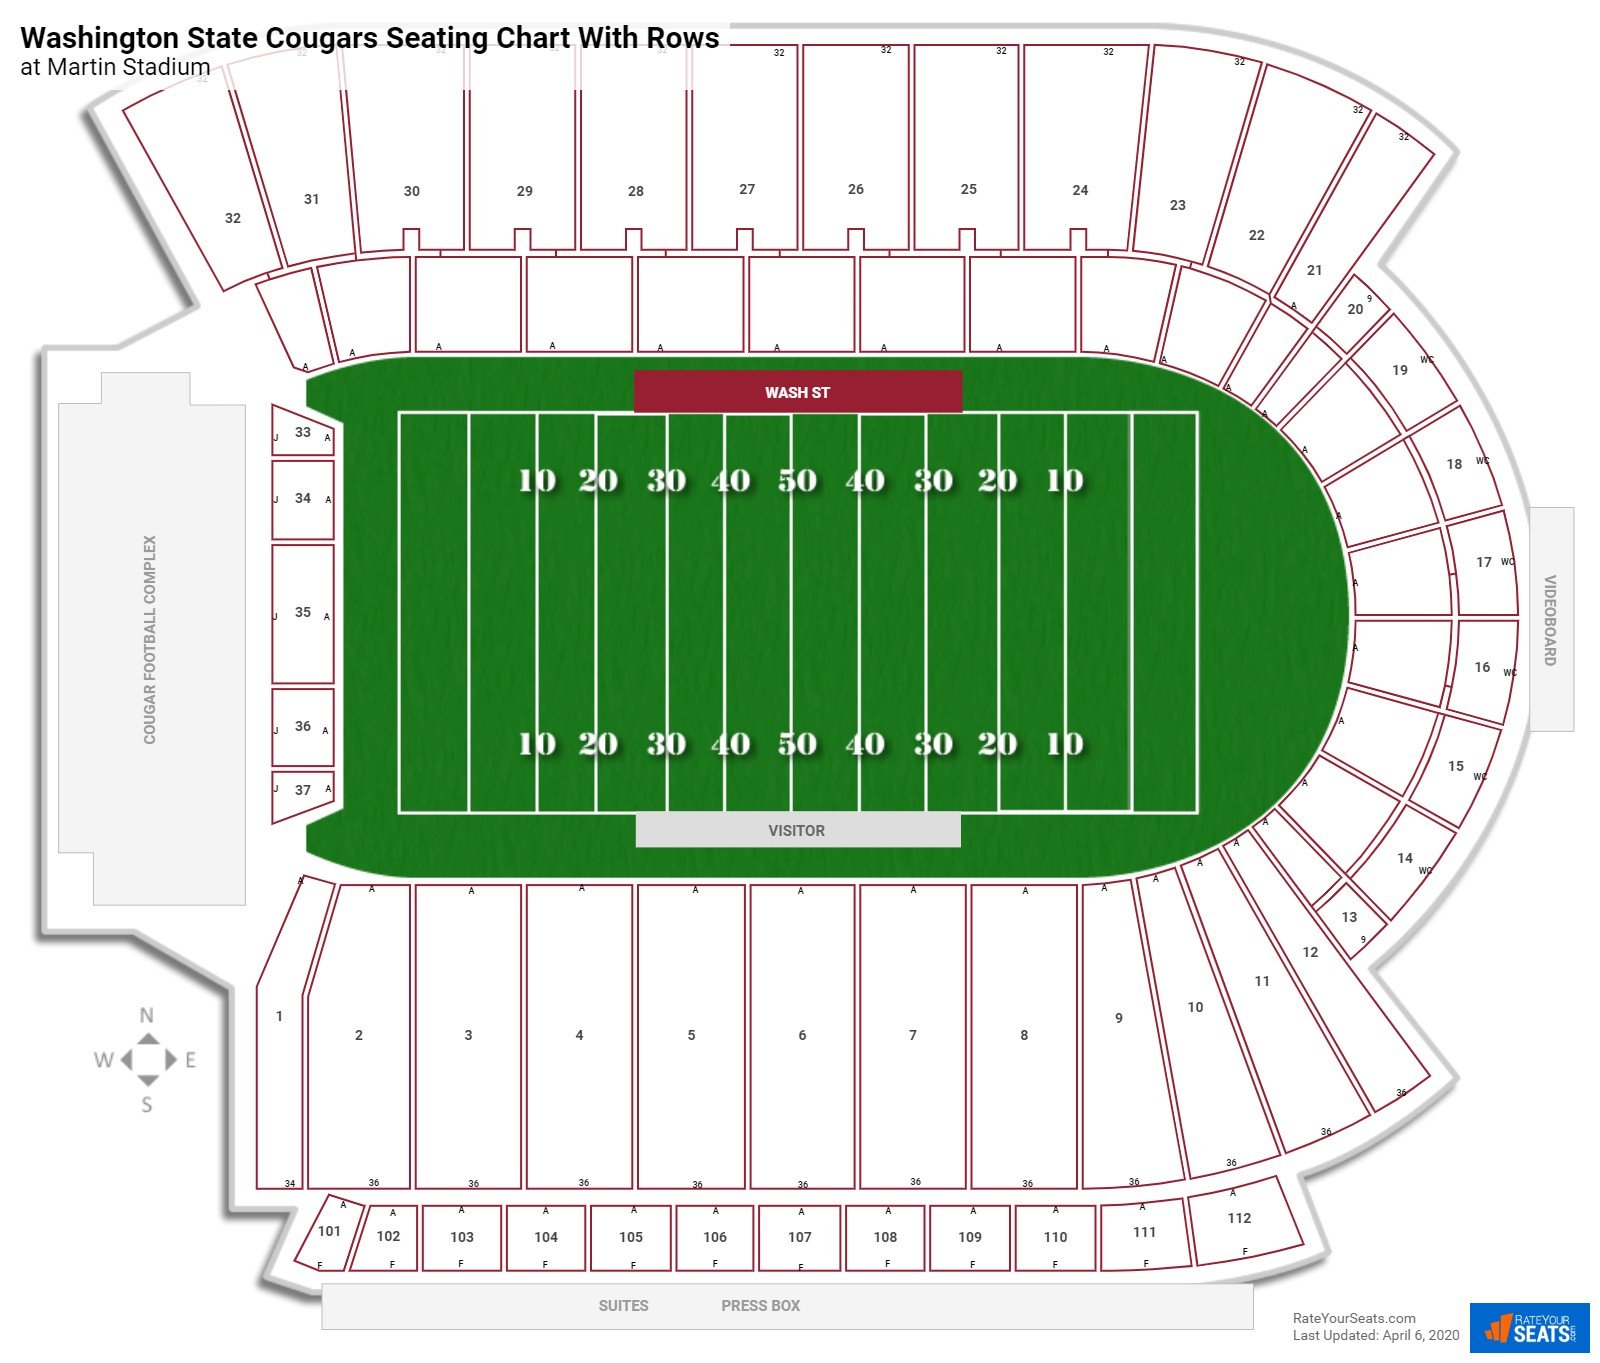 Martin Stadium seating chart with row numbers